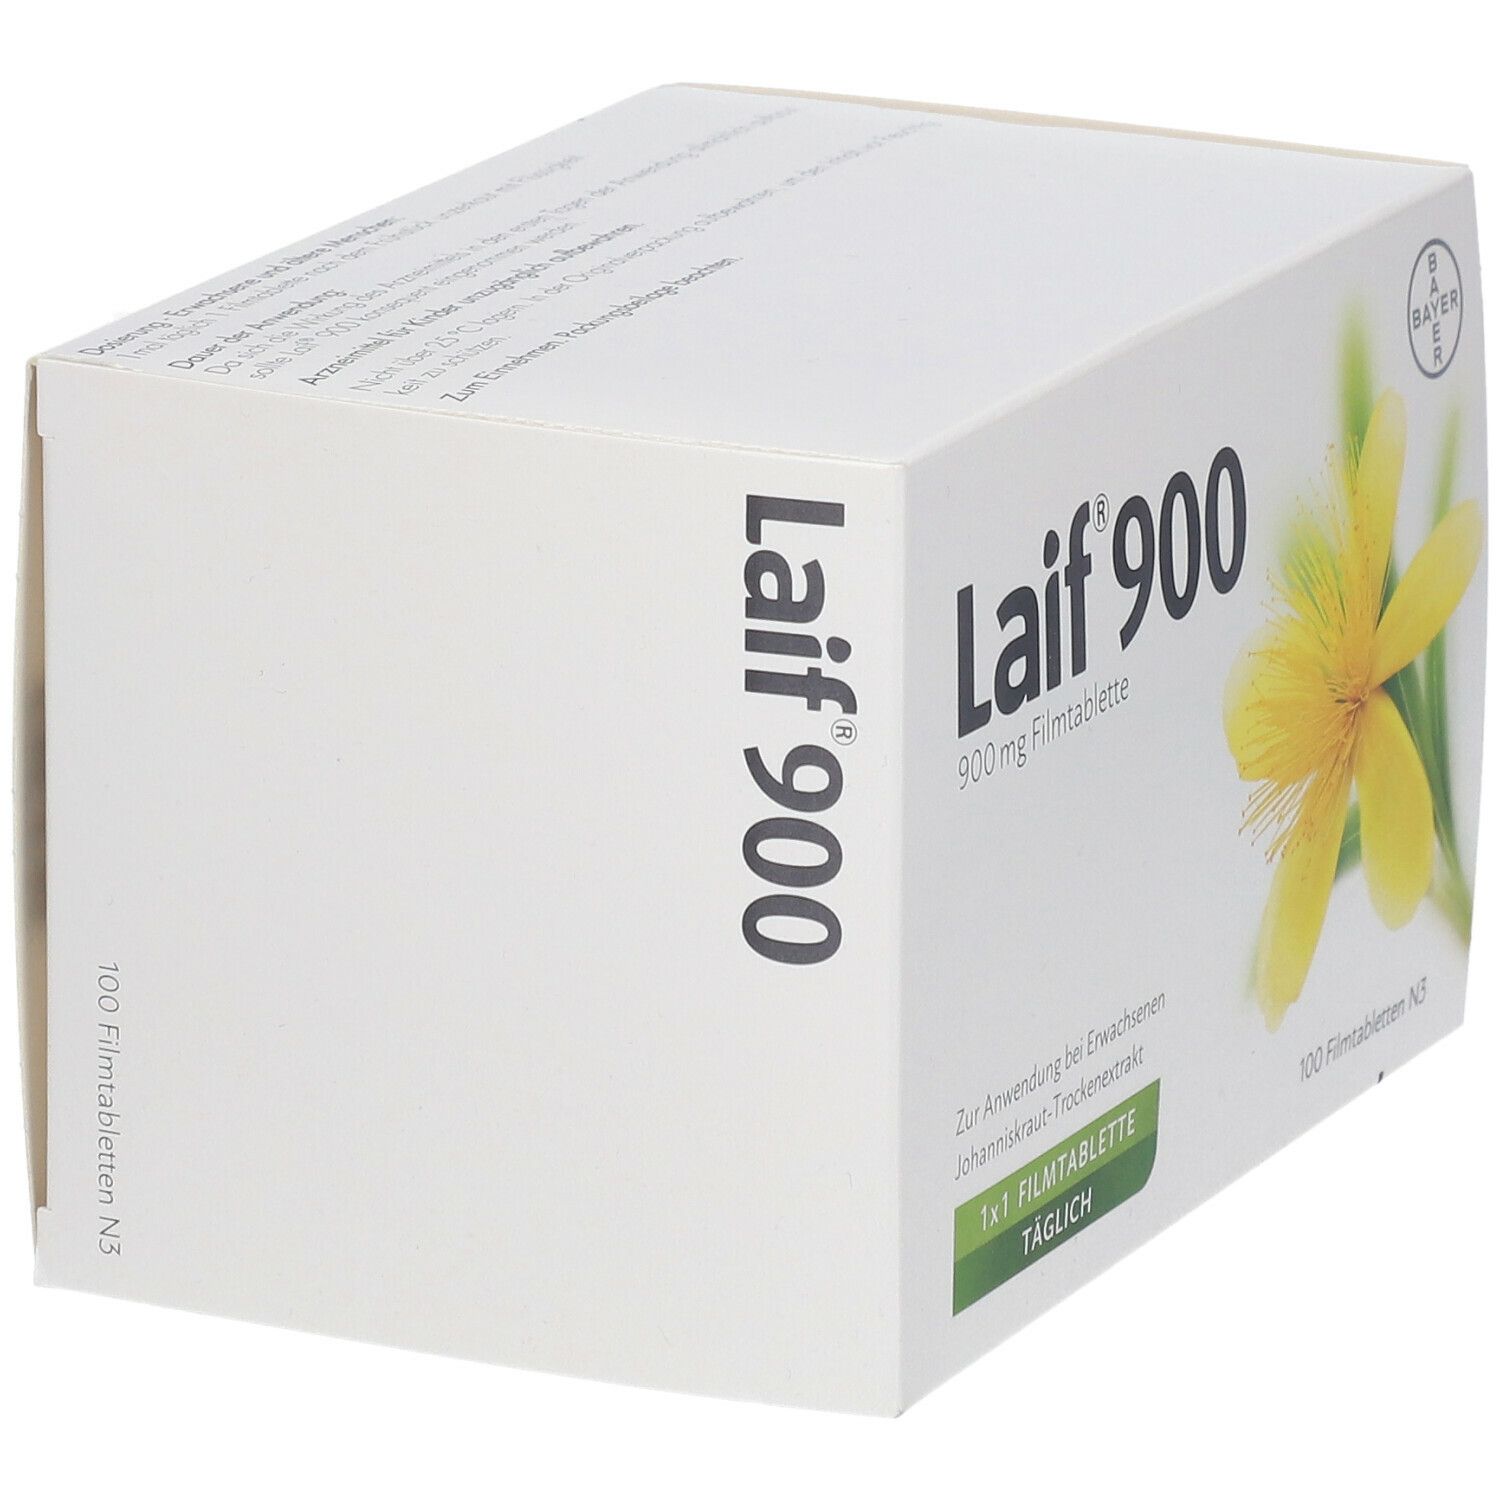 Laif® 900